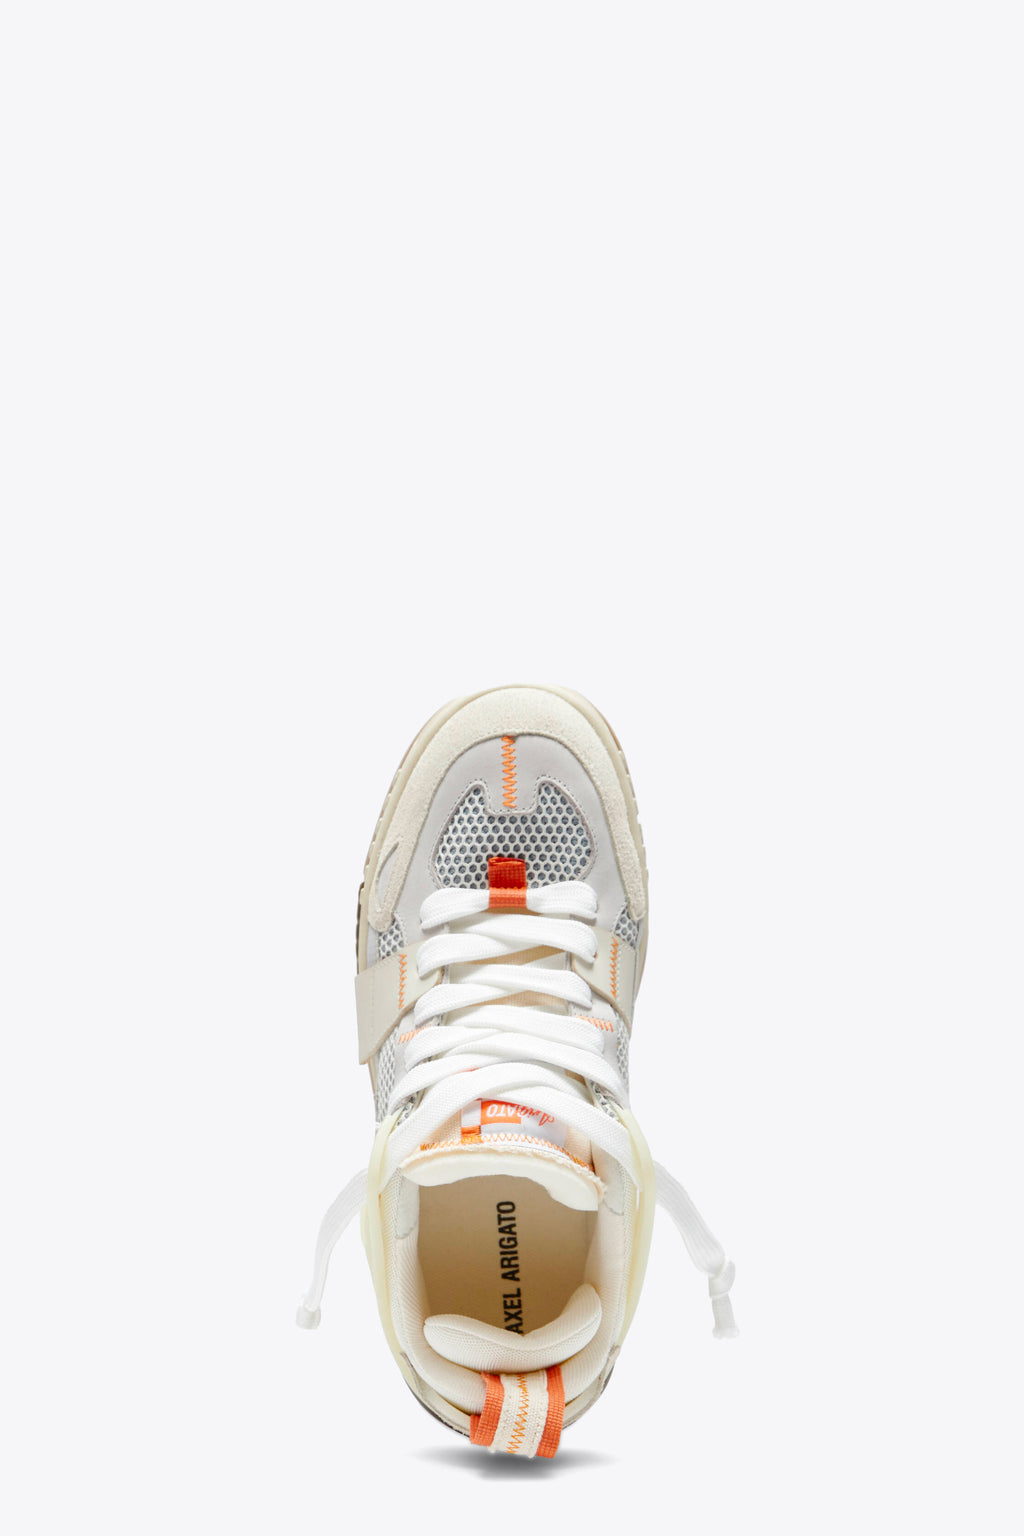 alt-image__Off-white-and-beige-low-sneaker---Area-Patchwork-Sneaker-